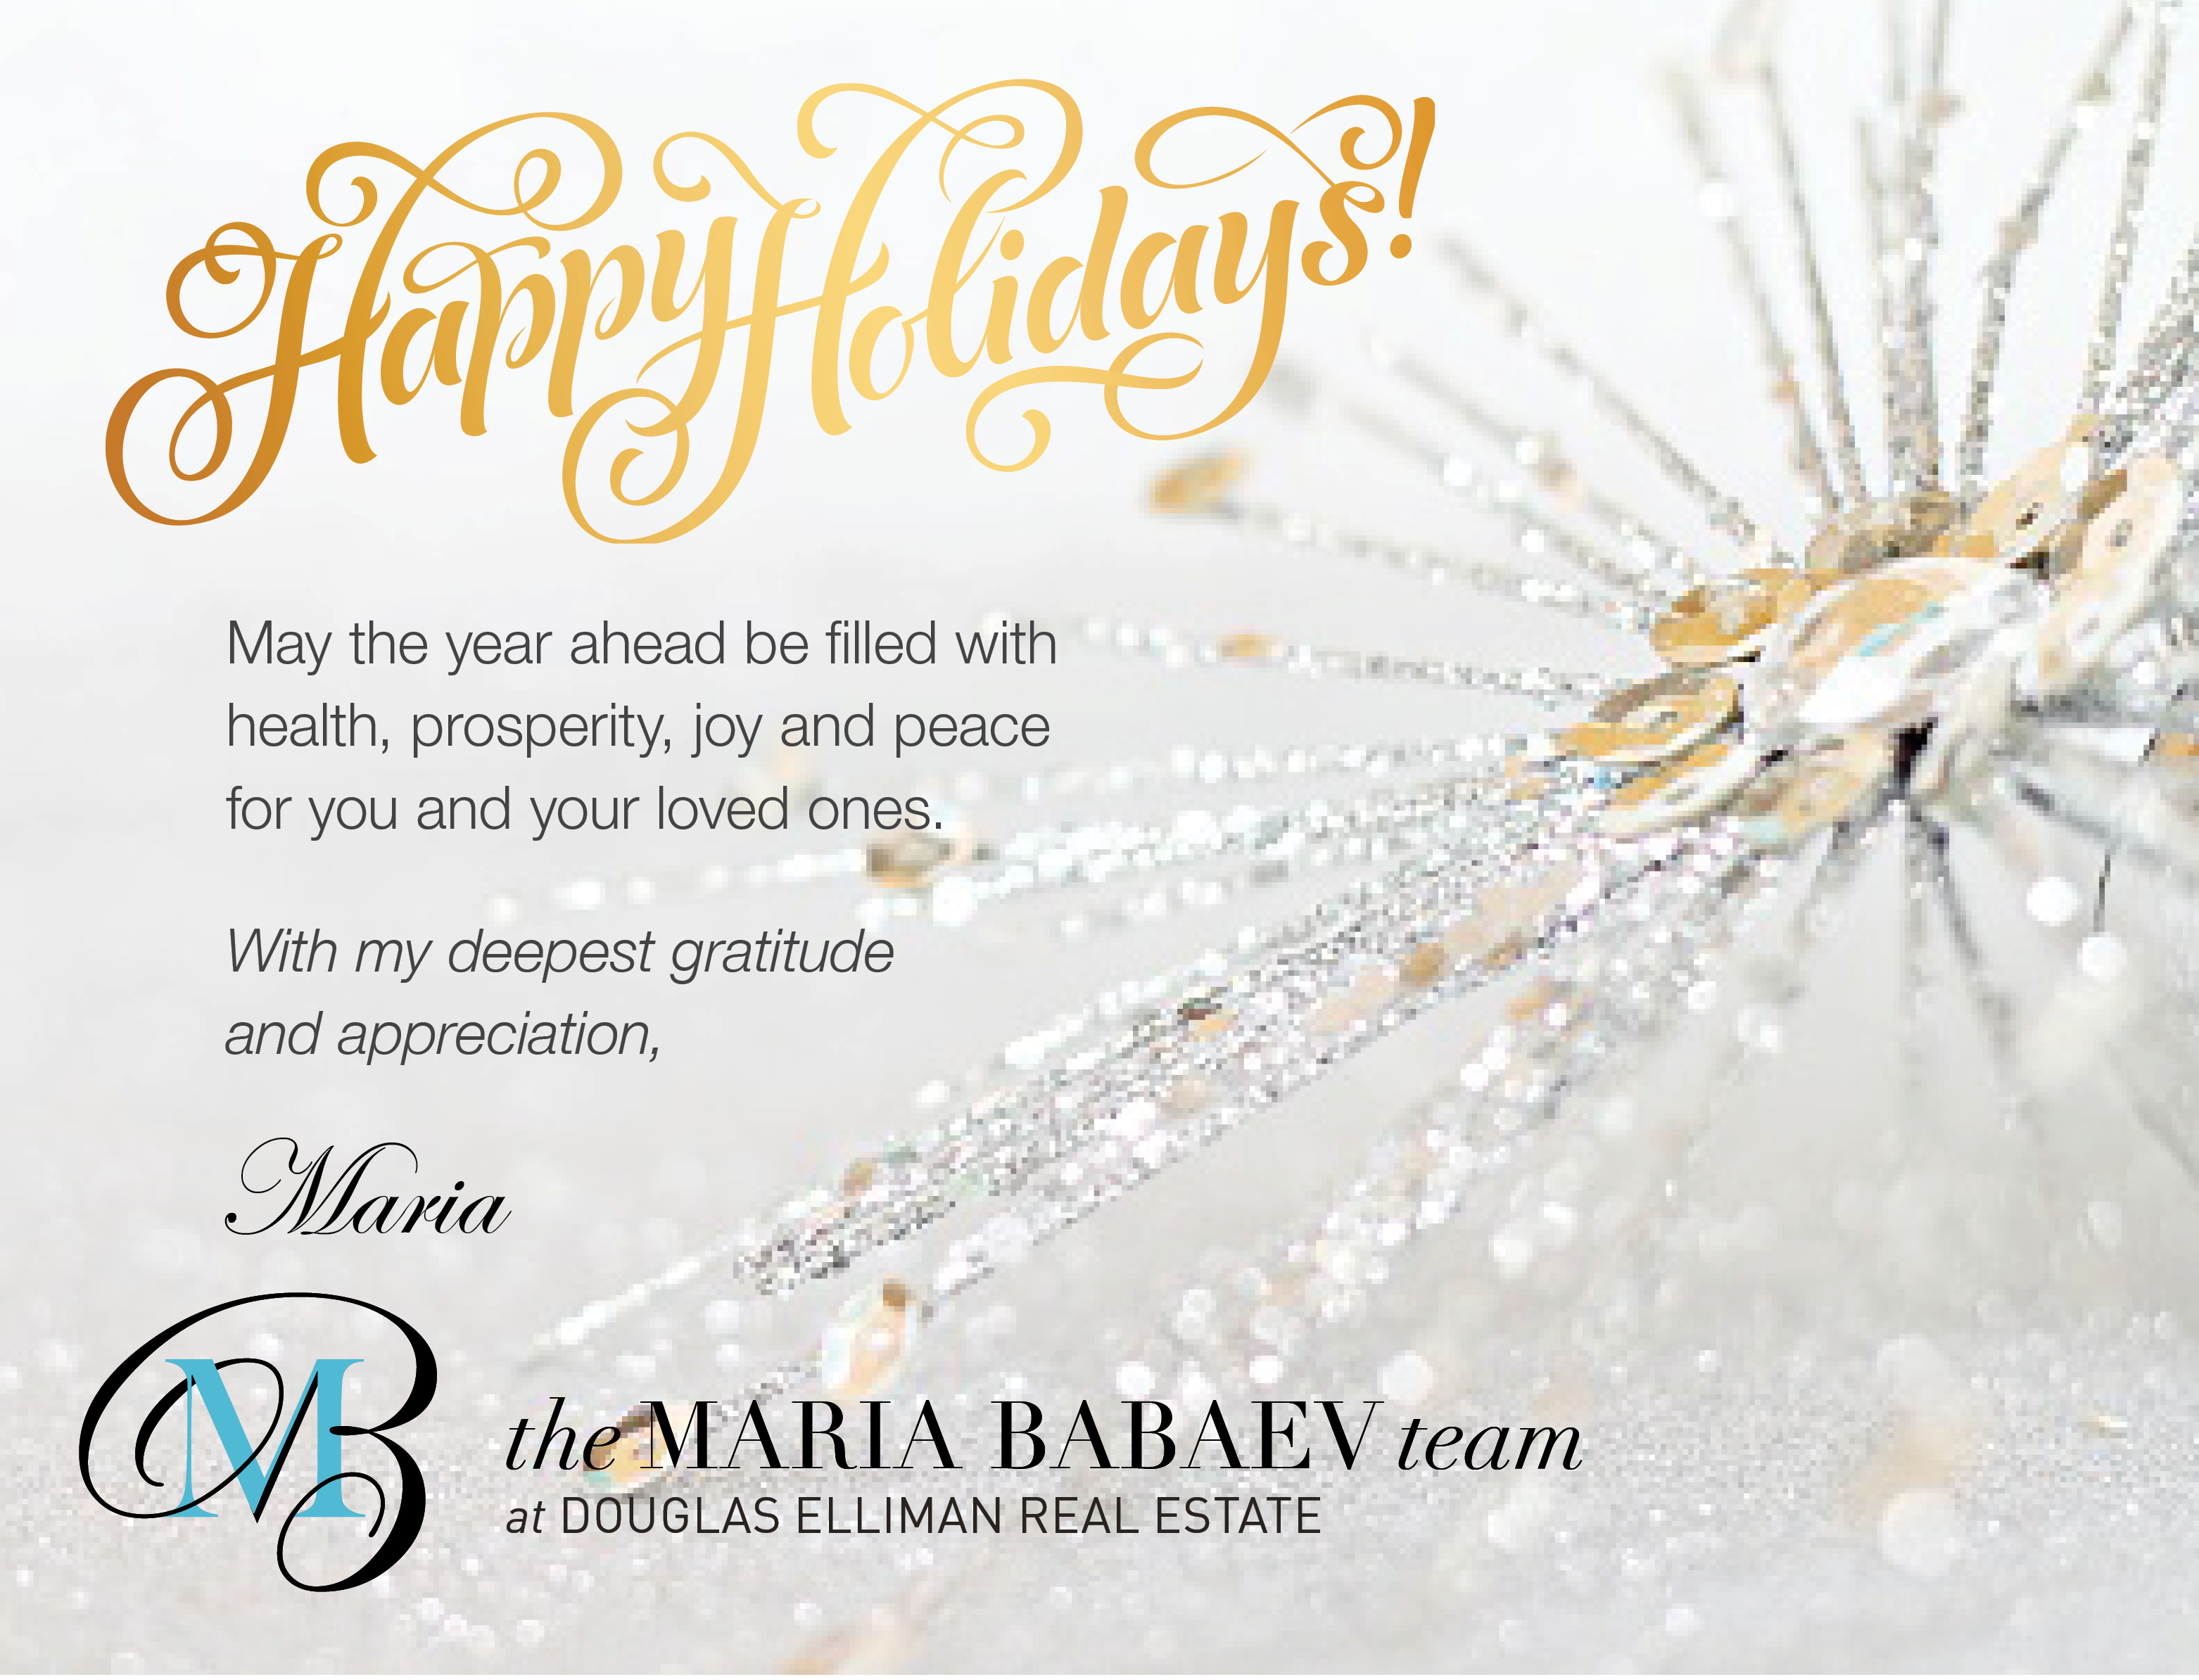 Happy Holidays From The Maria Babaev Team!